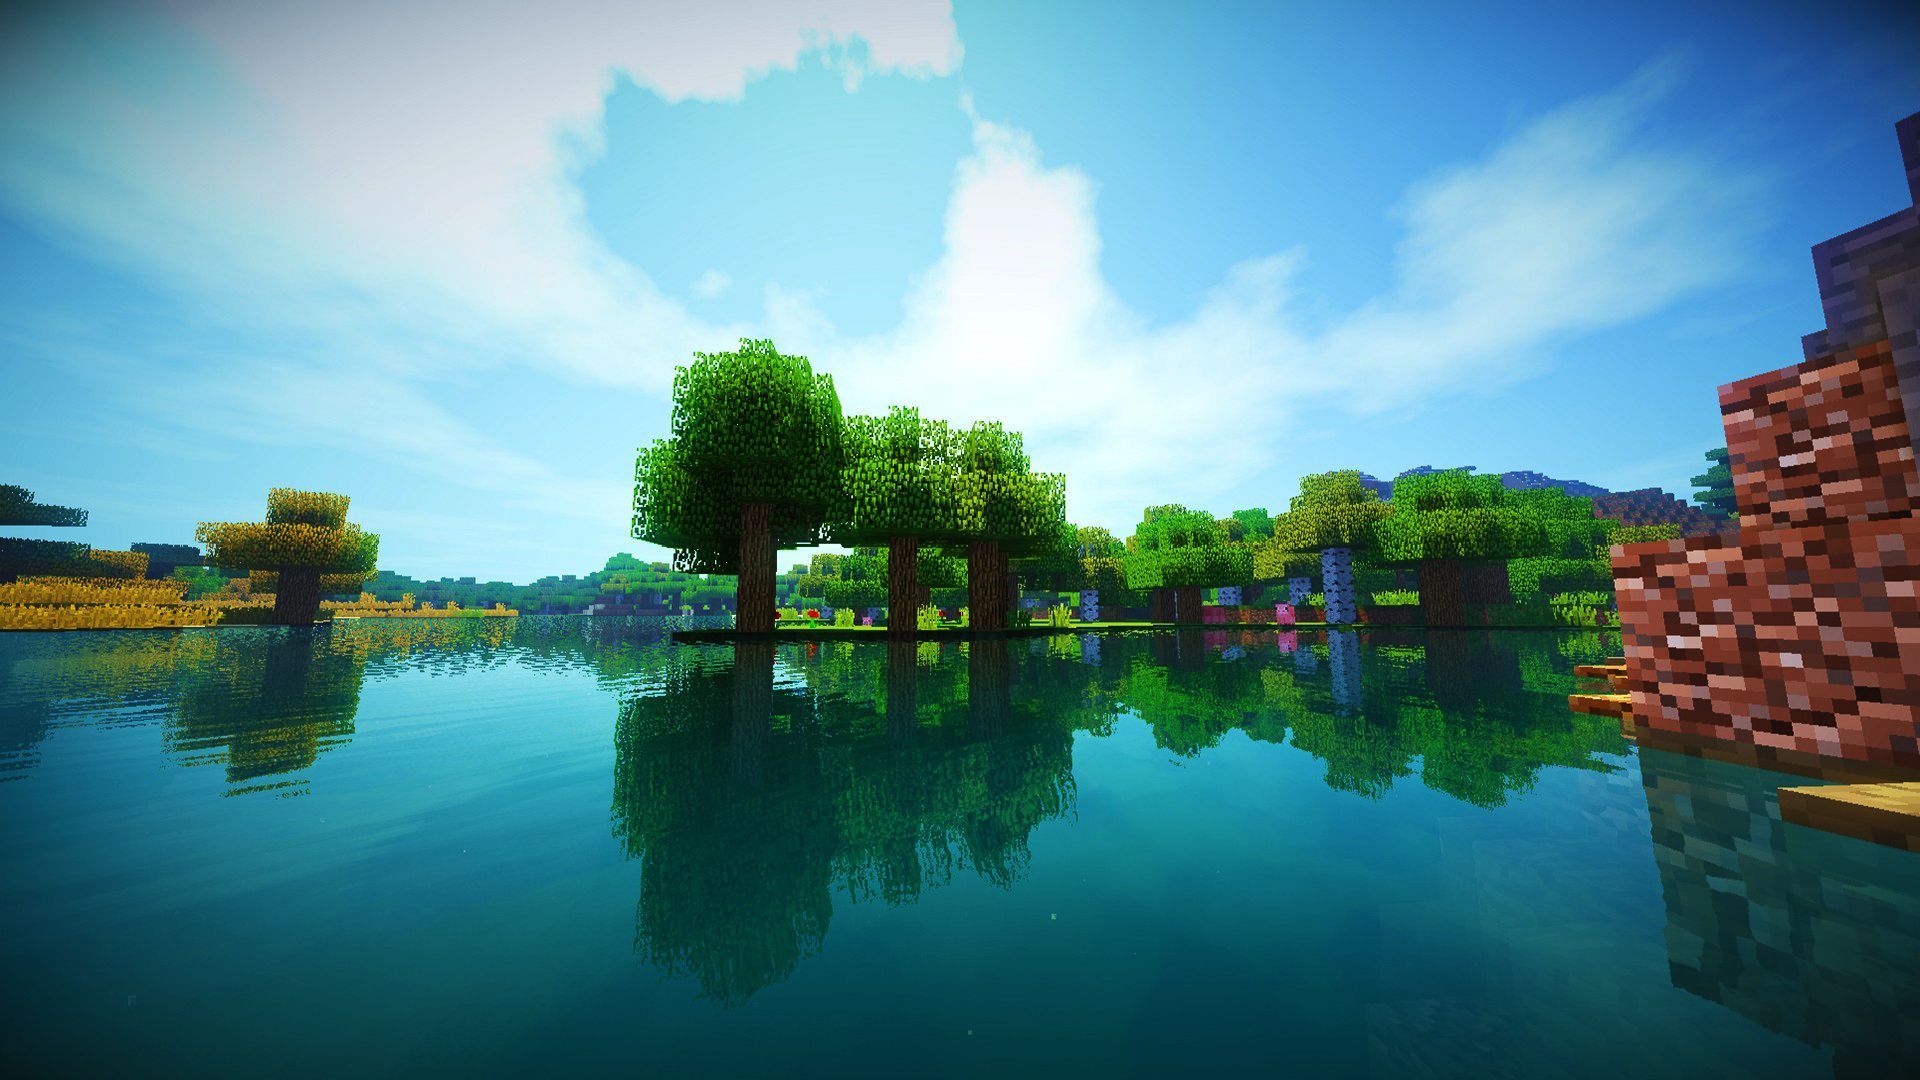 3840x2130 minecraft 4k edition 4k wallpaper hd download - Coolwallpapers.me!